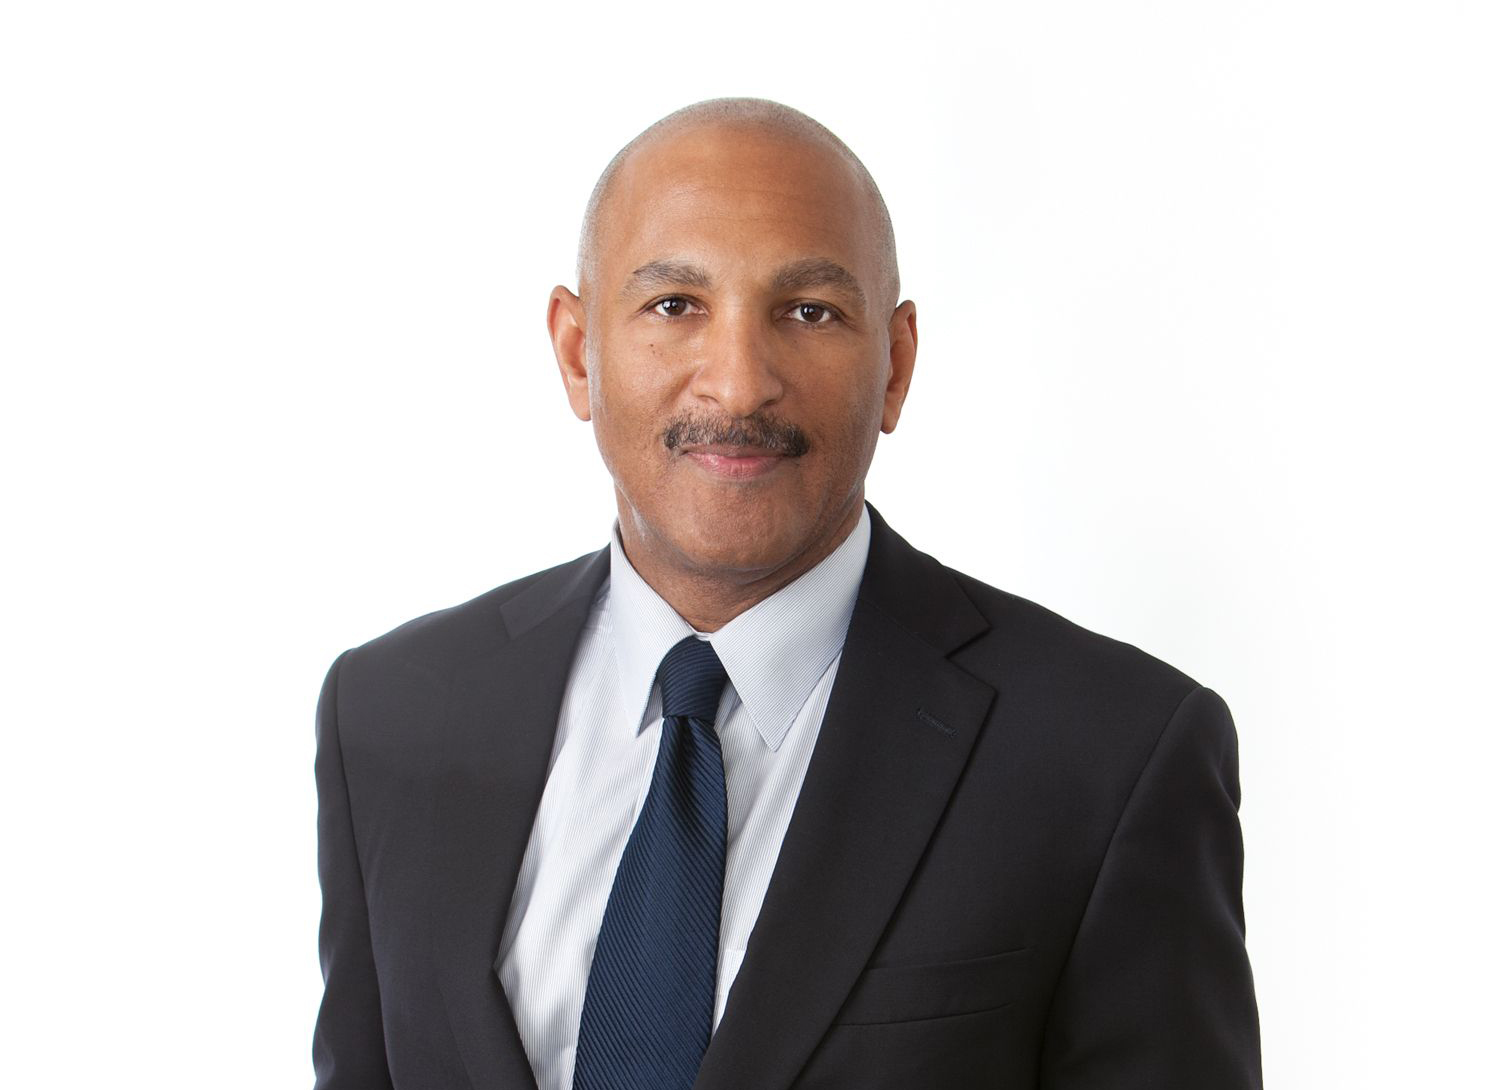 Fred Franklin Jr. is transitioning to the full-time practice of law in the Rogers | Towers Litigation Department.